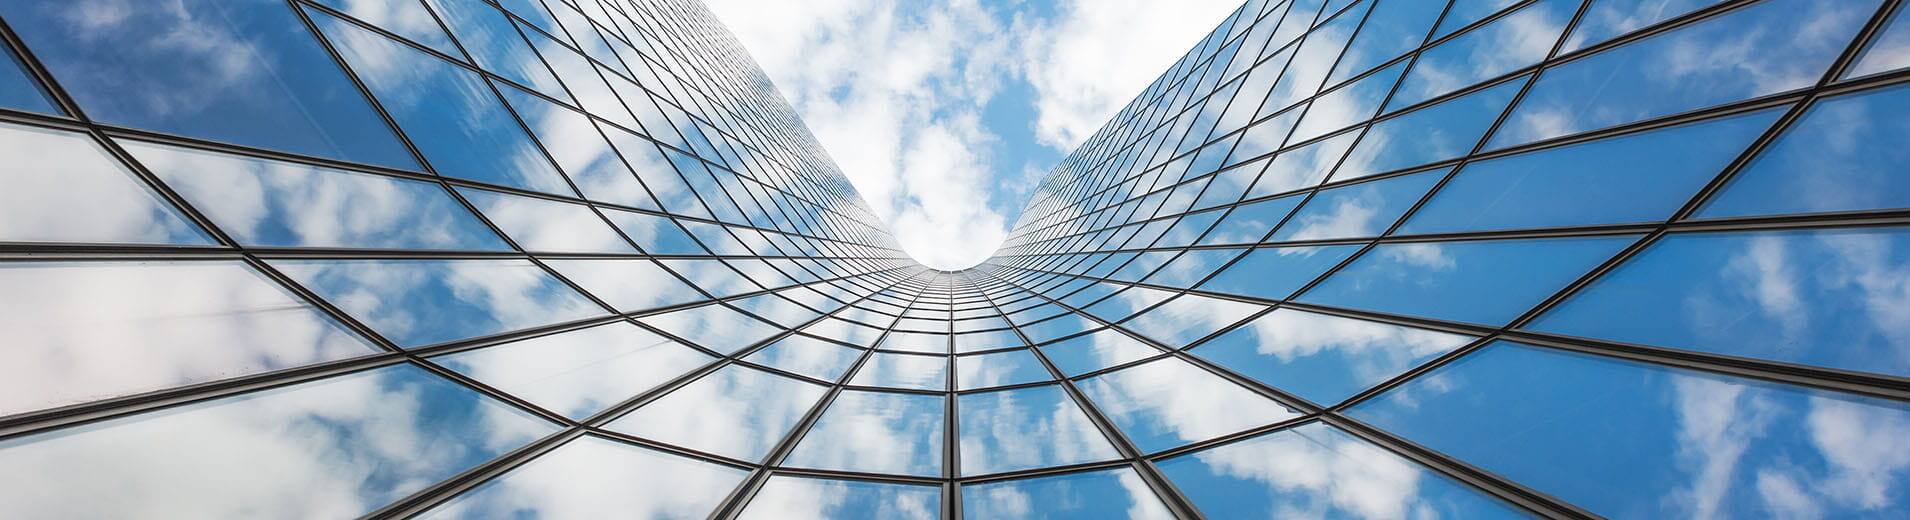 Sky_and_Clouds_Reflecting_in_Building_P_1072